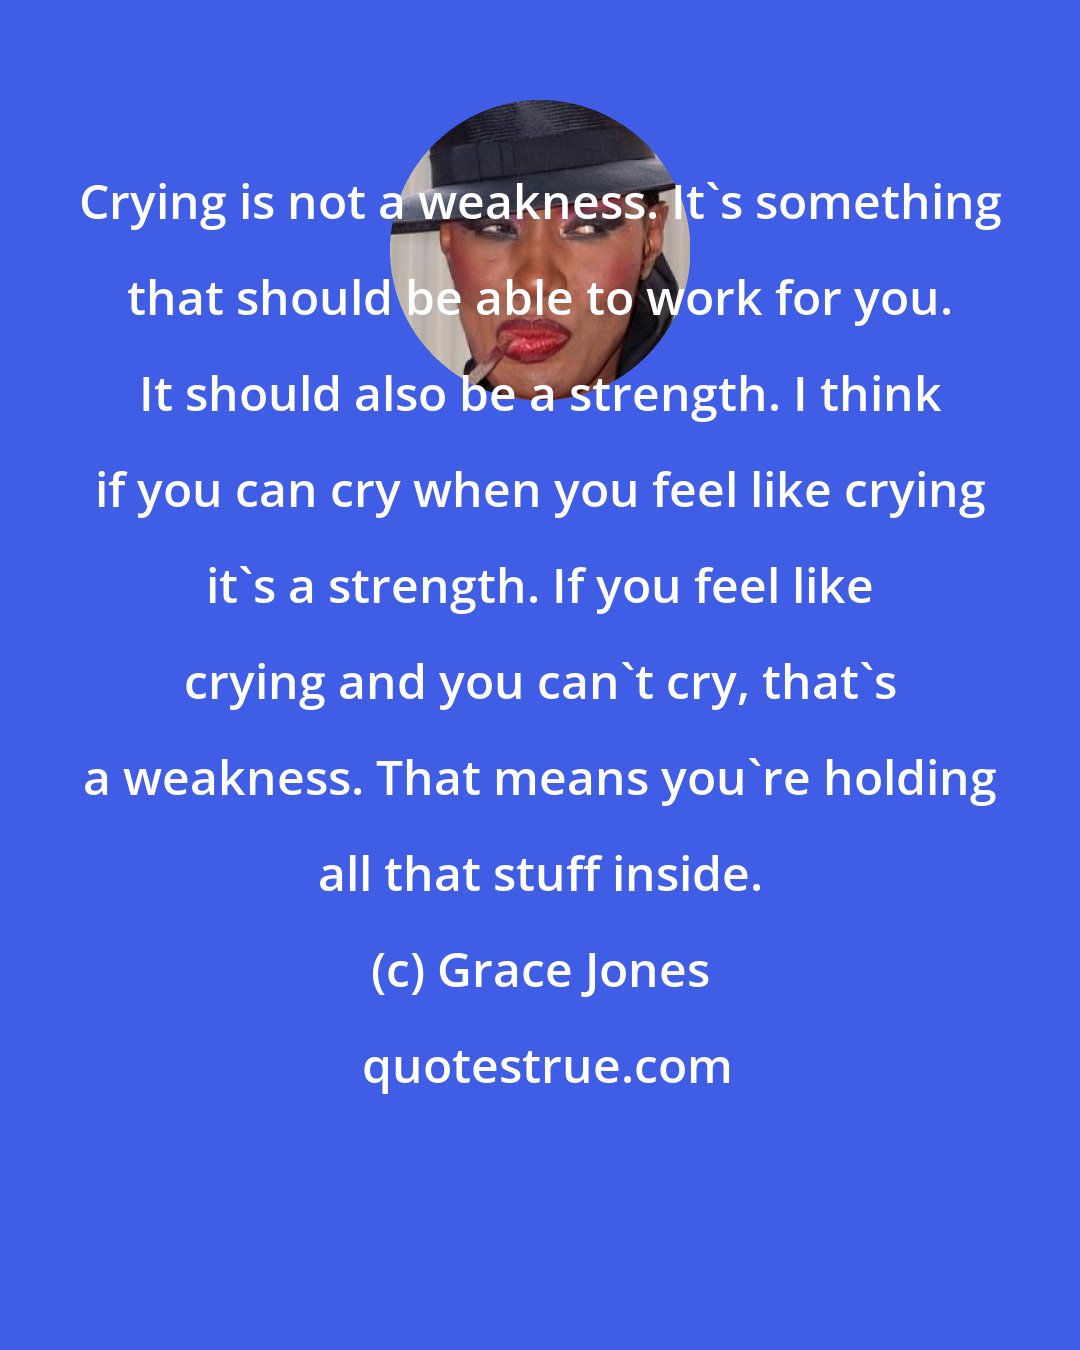 Grace Jones: Crying is not a weakness. It's something that should be able to work for you. It should also be a strength. I think if you can cry when you feel like crying it's a strength. If you feel like crying and you can't cry, that's a weakness. That means you're holding all that stuff inside.